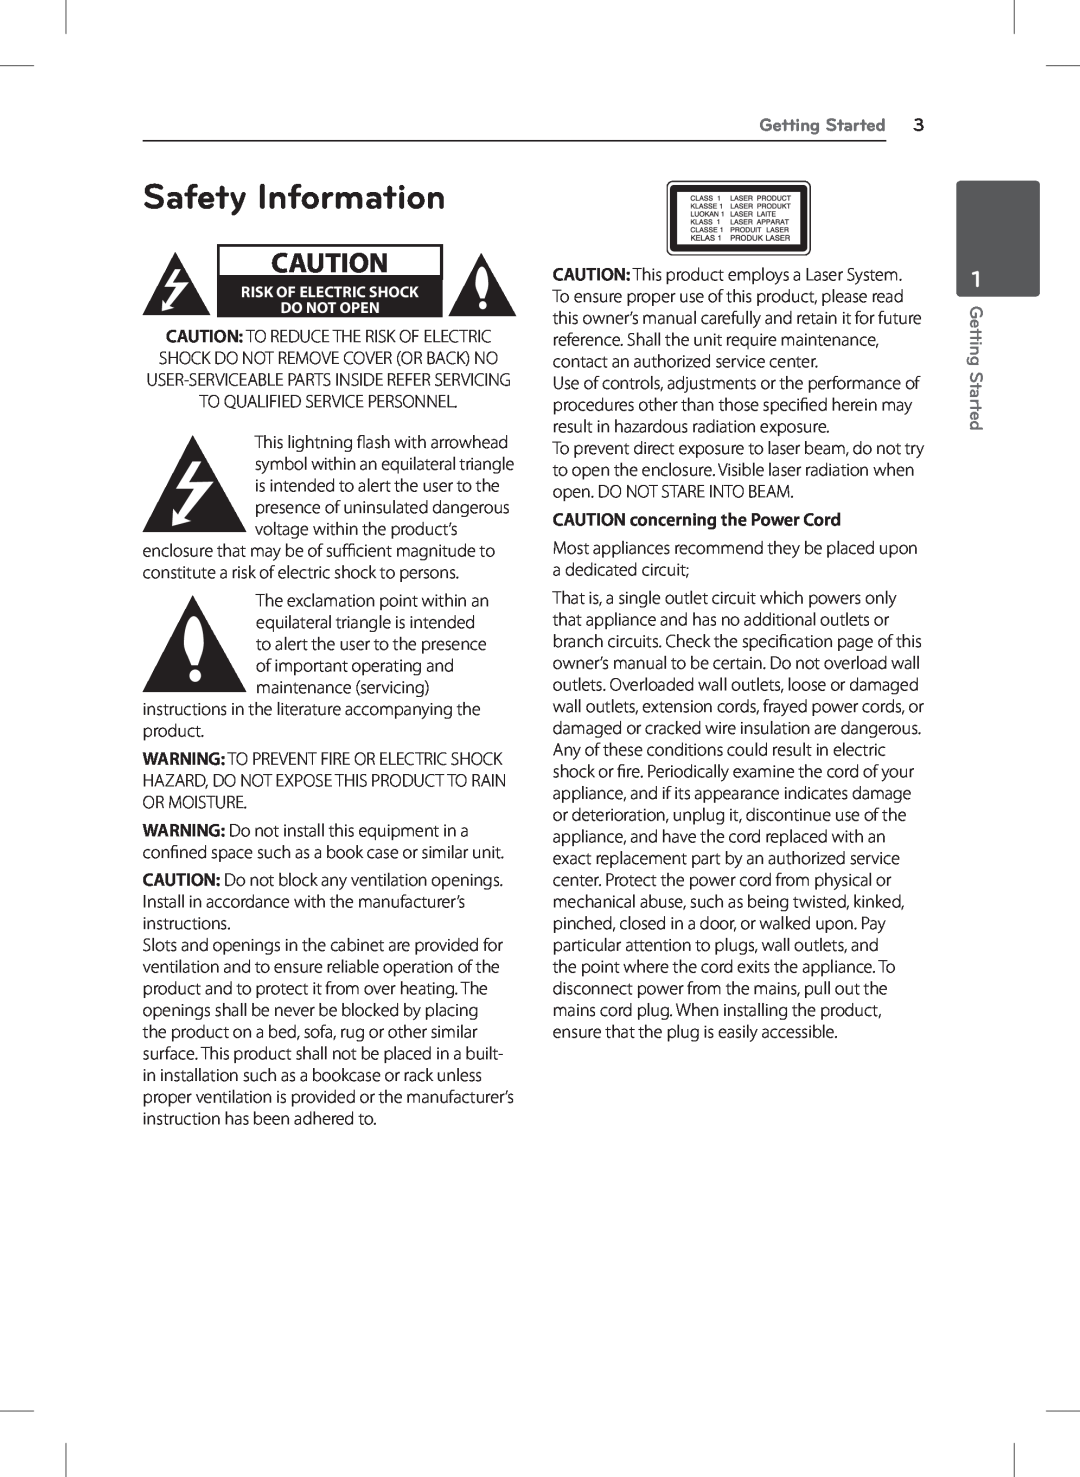 LG Electronics DVT699H owner manual Safety Information, CAUTION concerning the Power Cord, Getting Started 